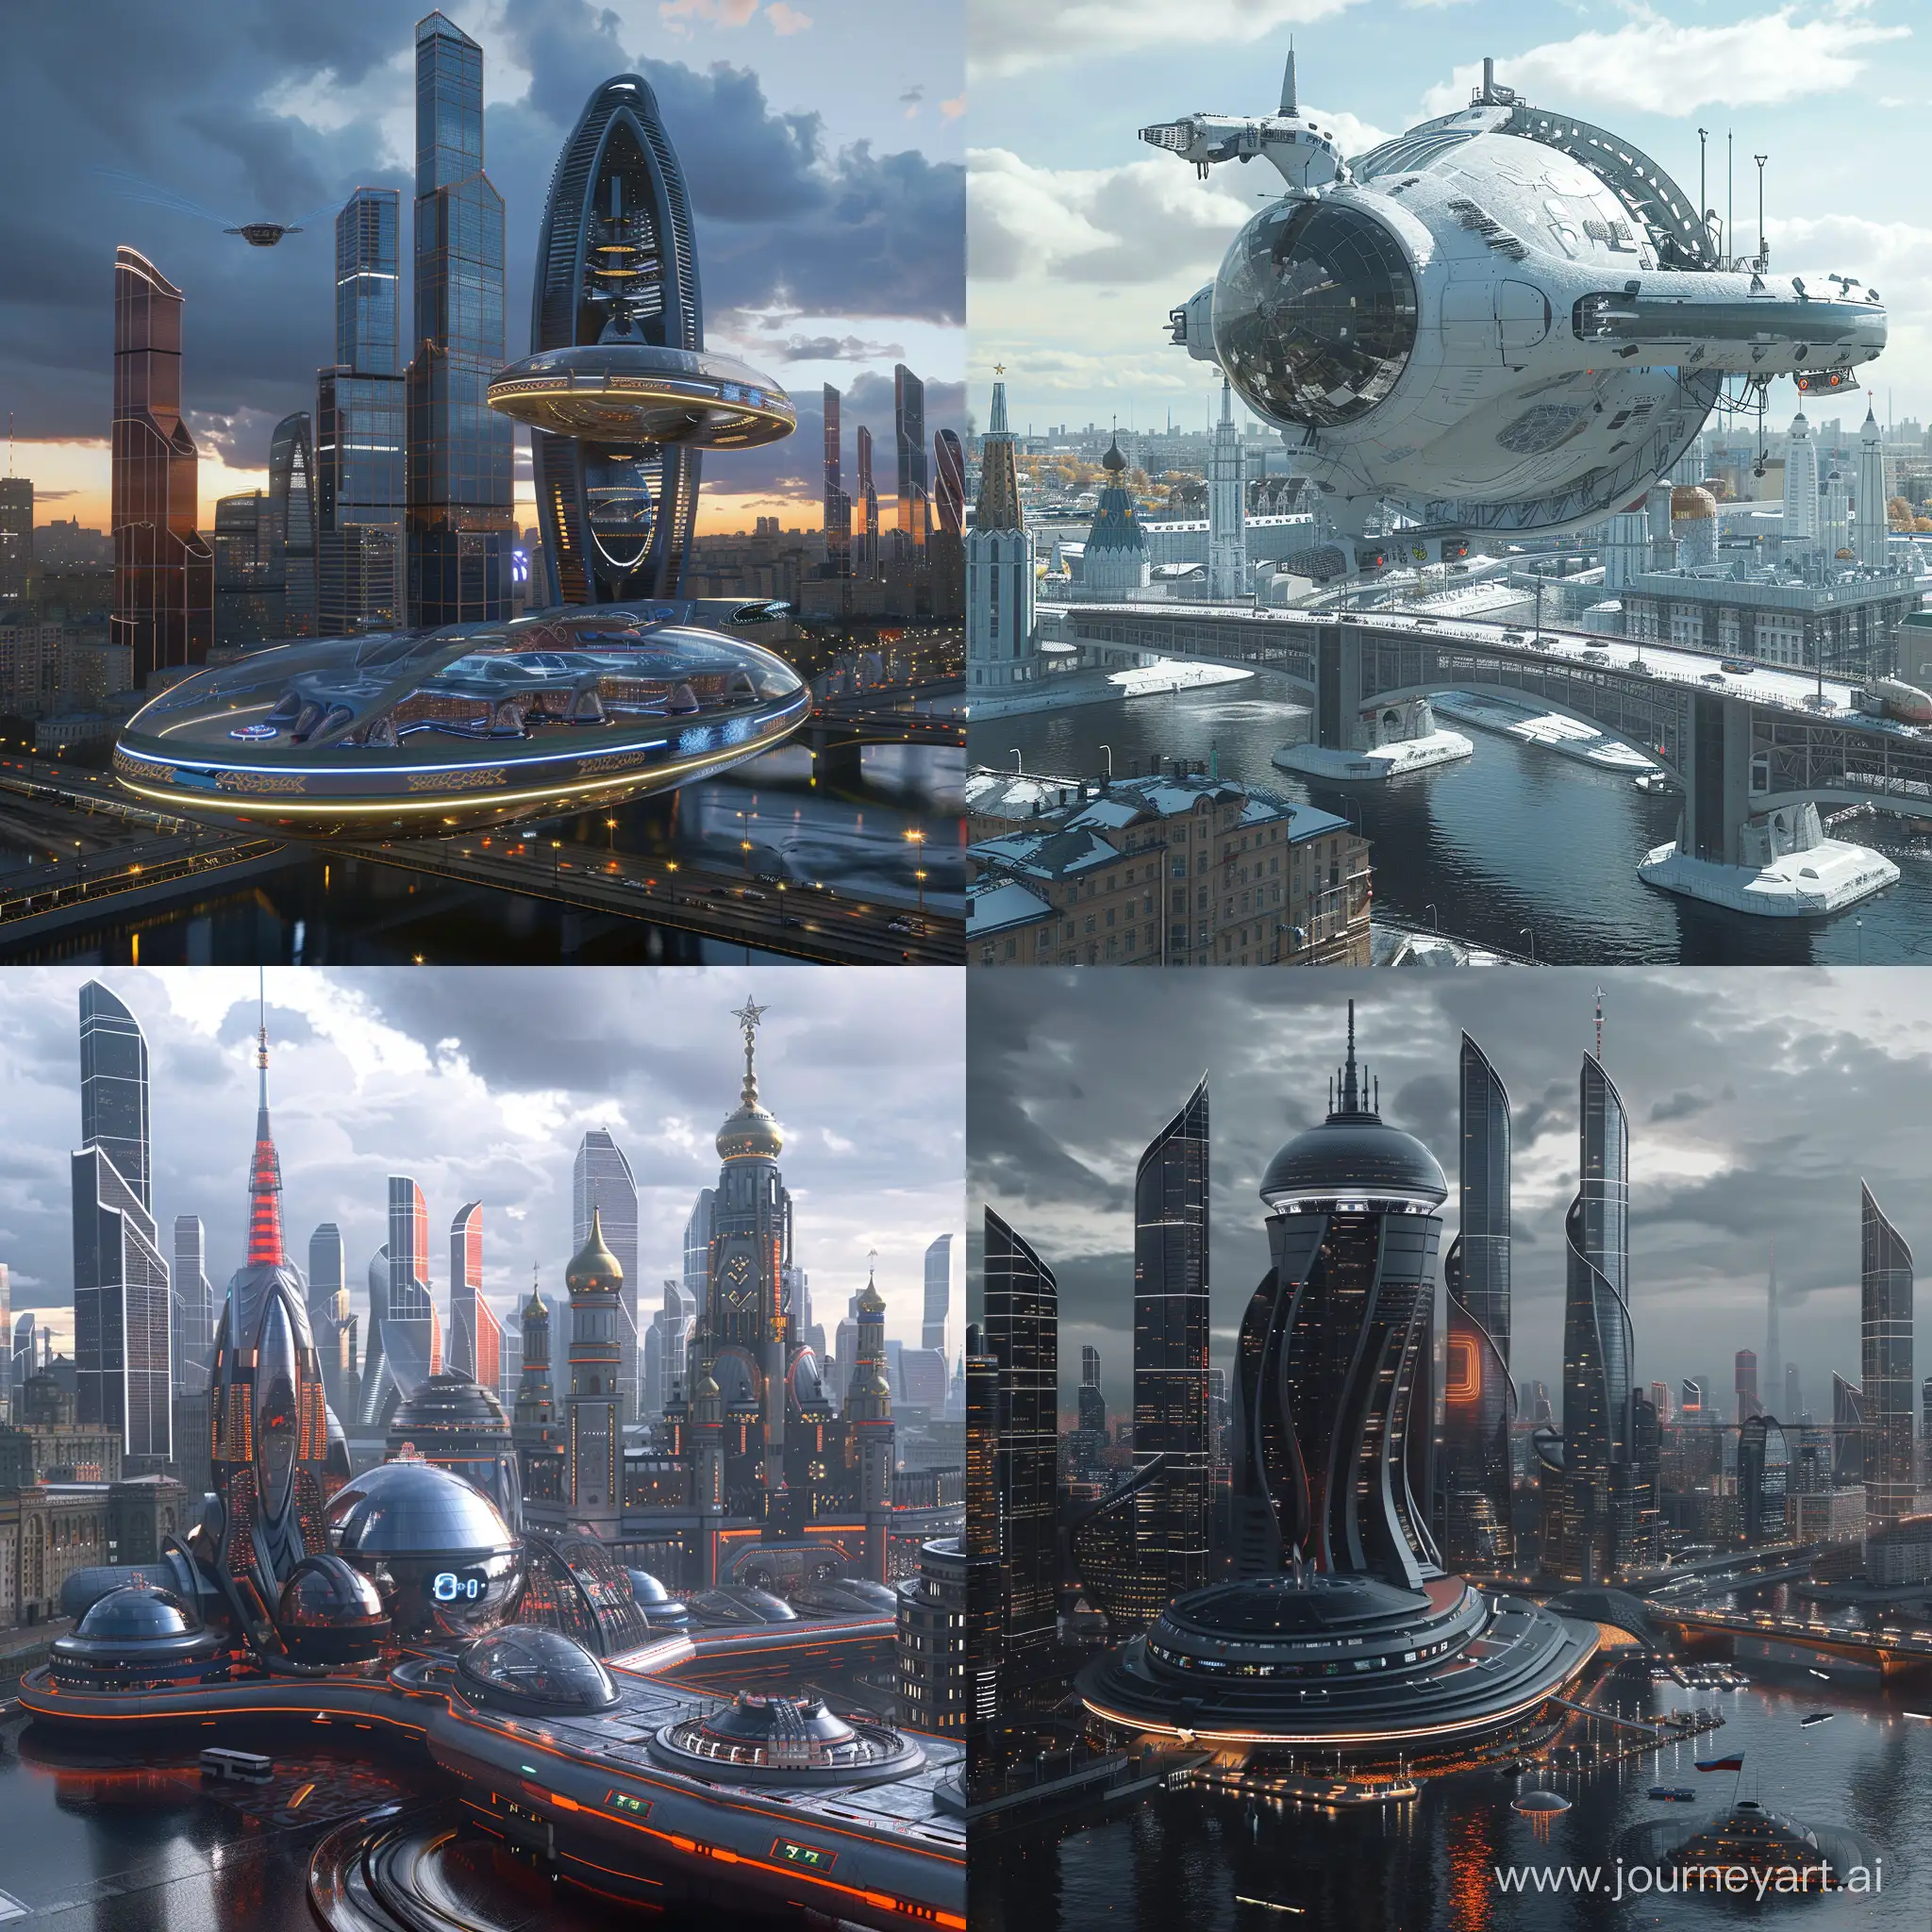 Futuristic-Moscow-HighTech-Cityscape-with-Extreme-Durability